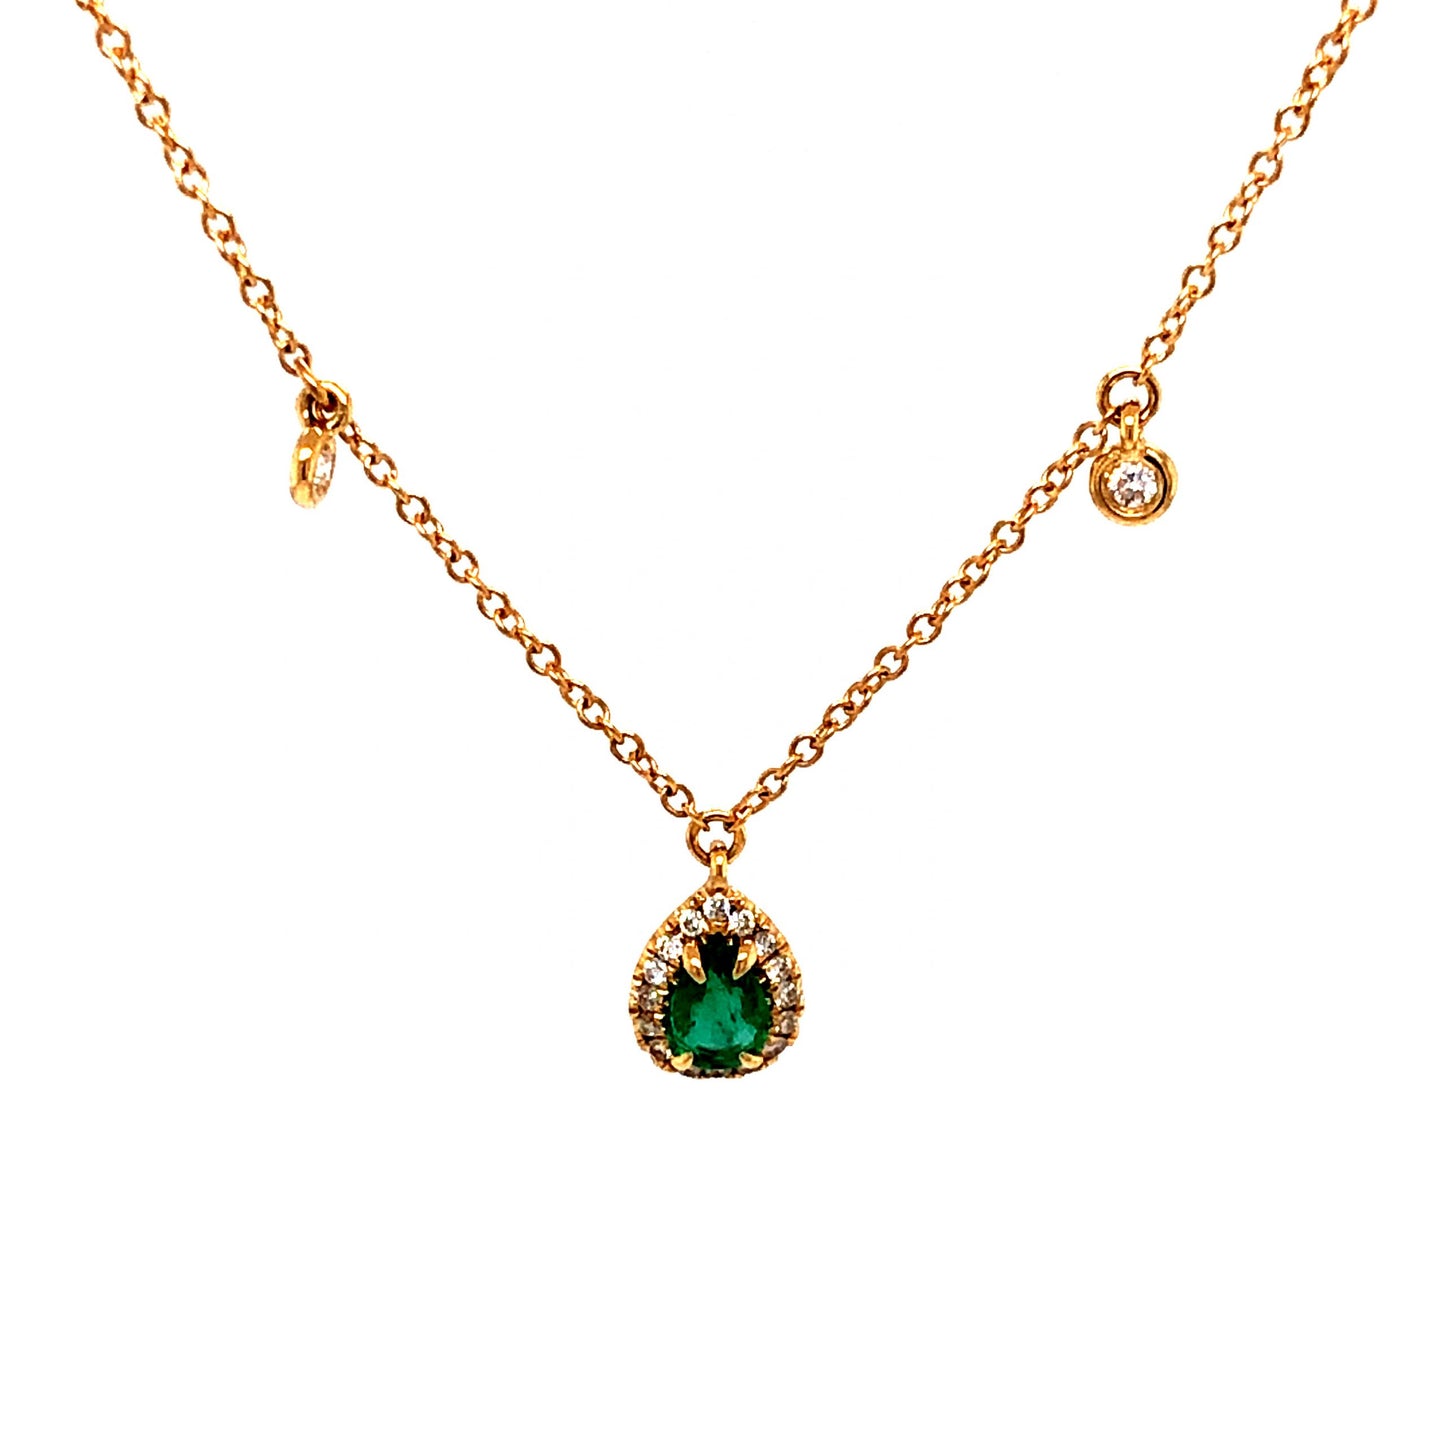 .19 Pear Cut Emerald & Diamond Necklace in 18k Yellow Gold